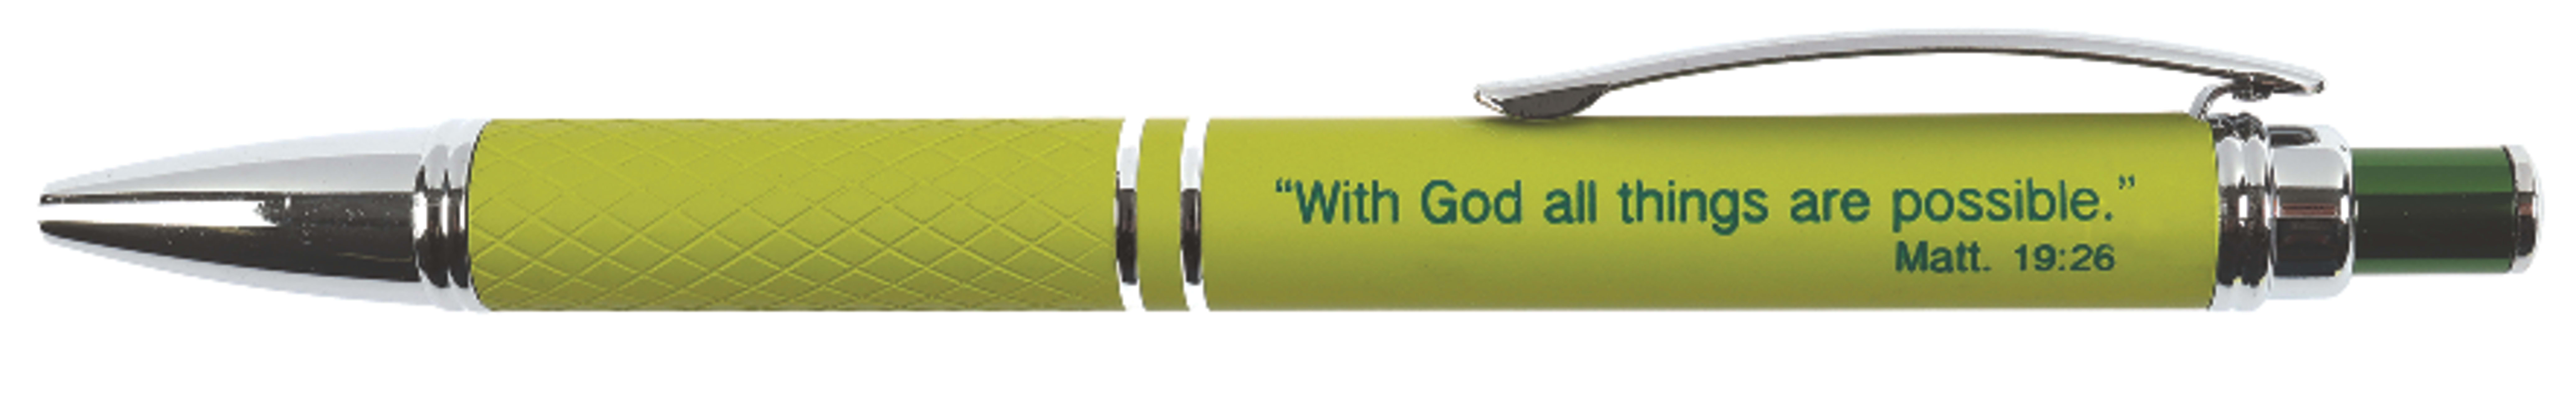 Stylish Pen/Case Gift Set: With God All Things Are Possible, Green Stationery